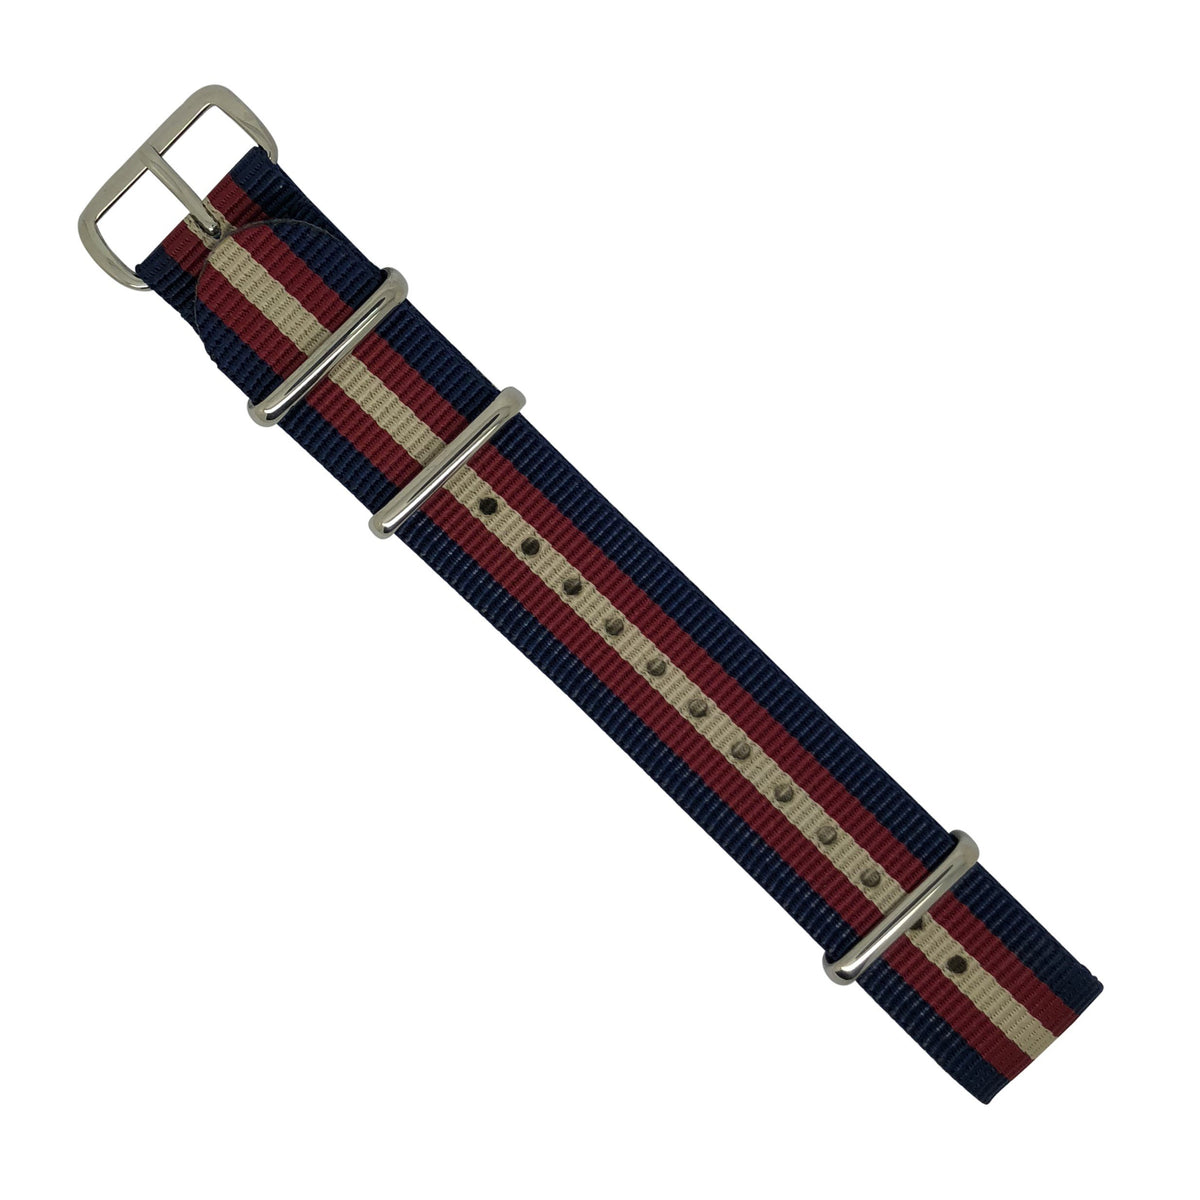 Premium Nato Strap in Navy Red Cream with Polished Silver Buckle (20mm) - Nomad Watch Works Malaysia